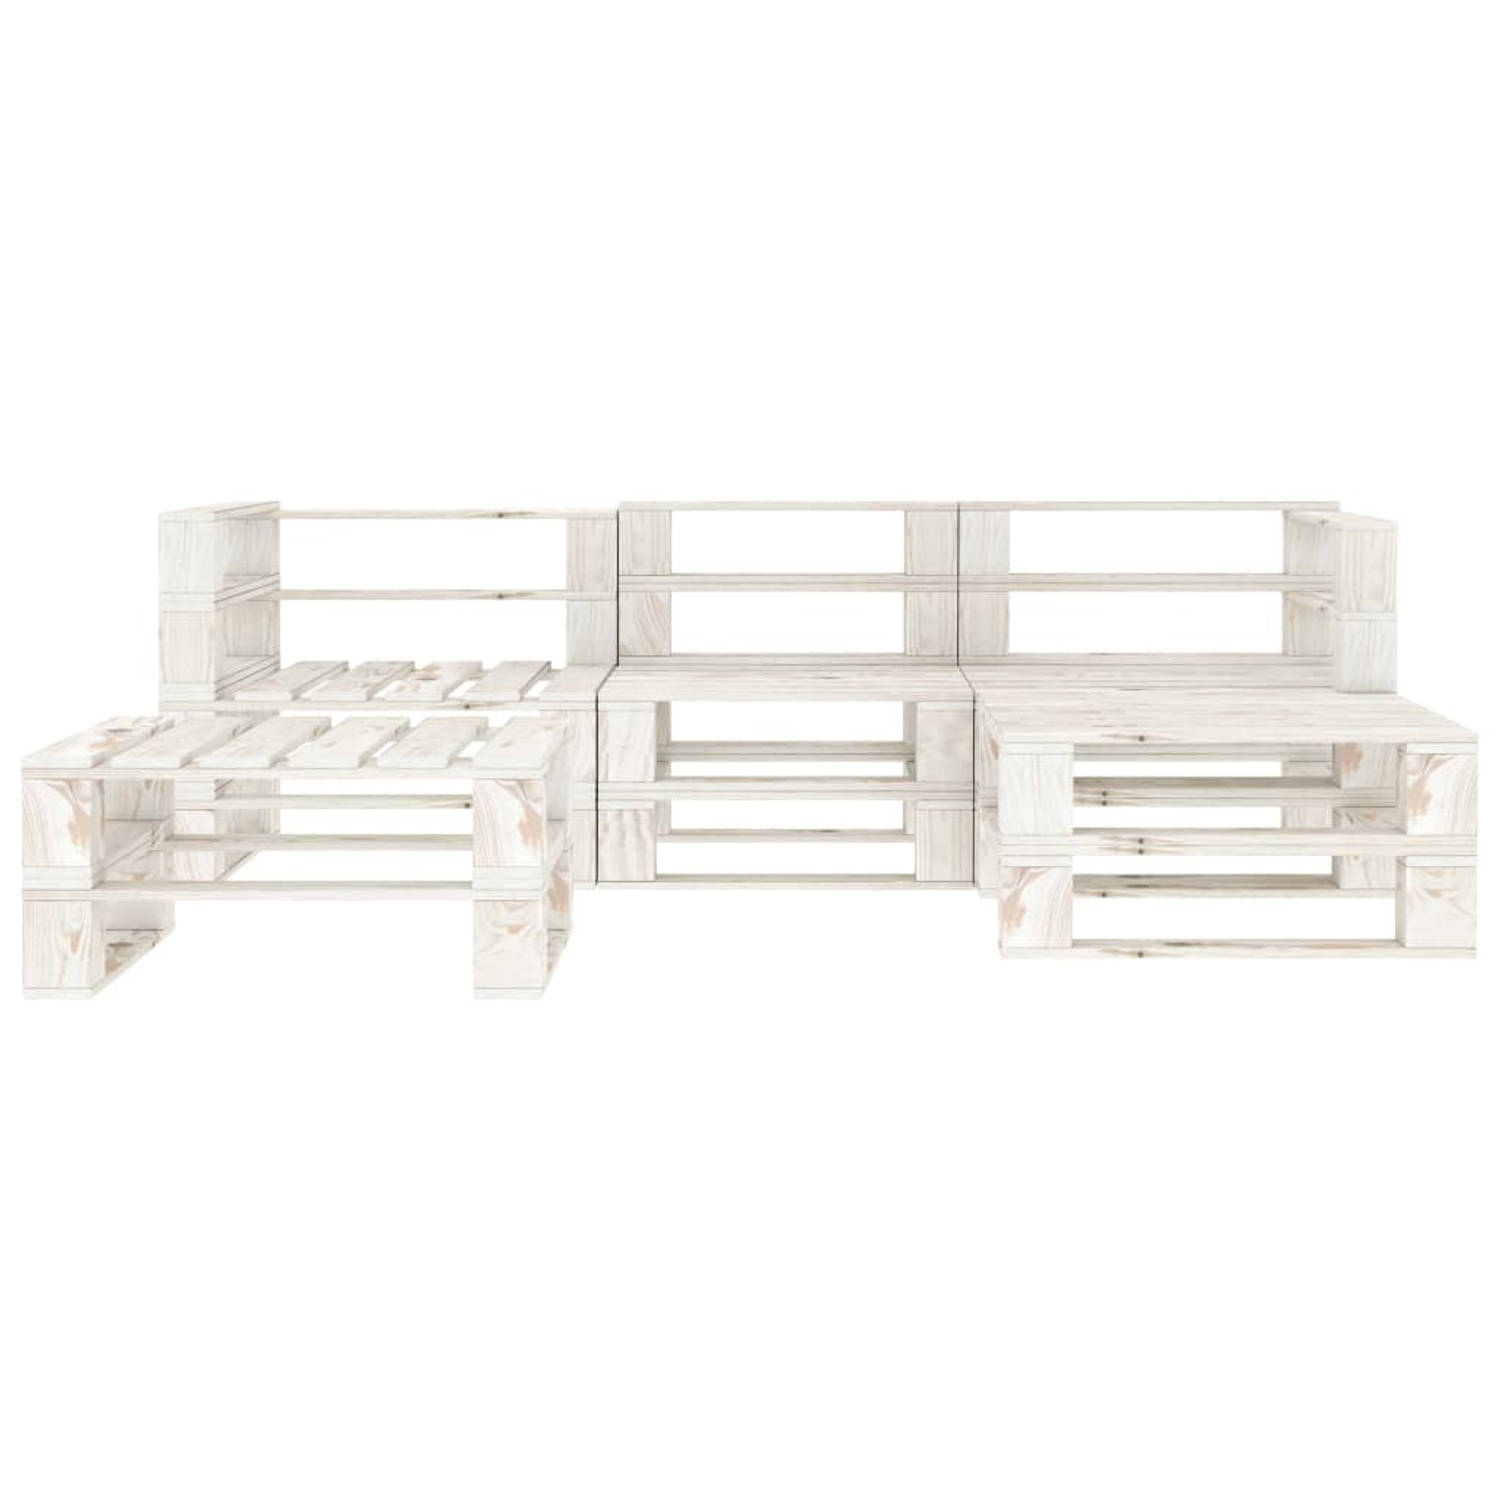 The Living Store 5-delige Loungeset pallet hout wit - Tuinset